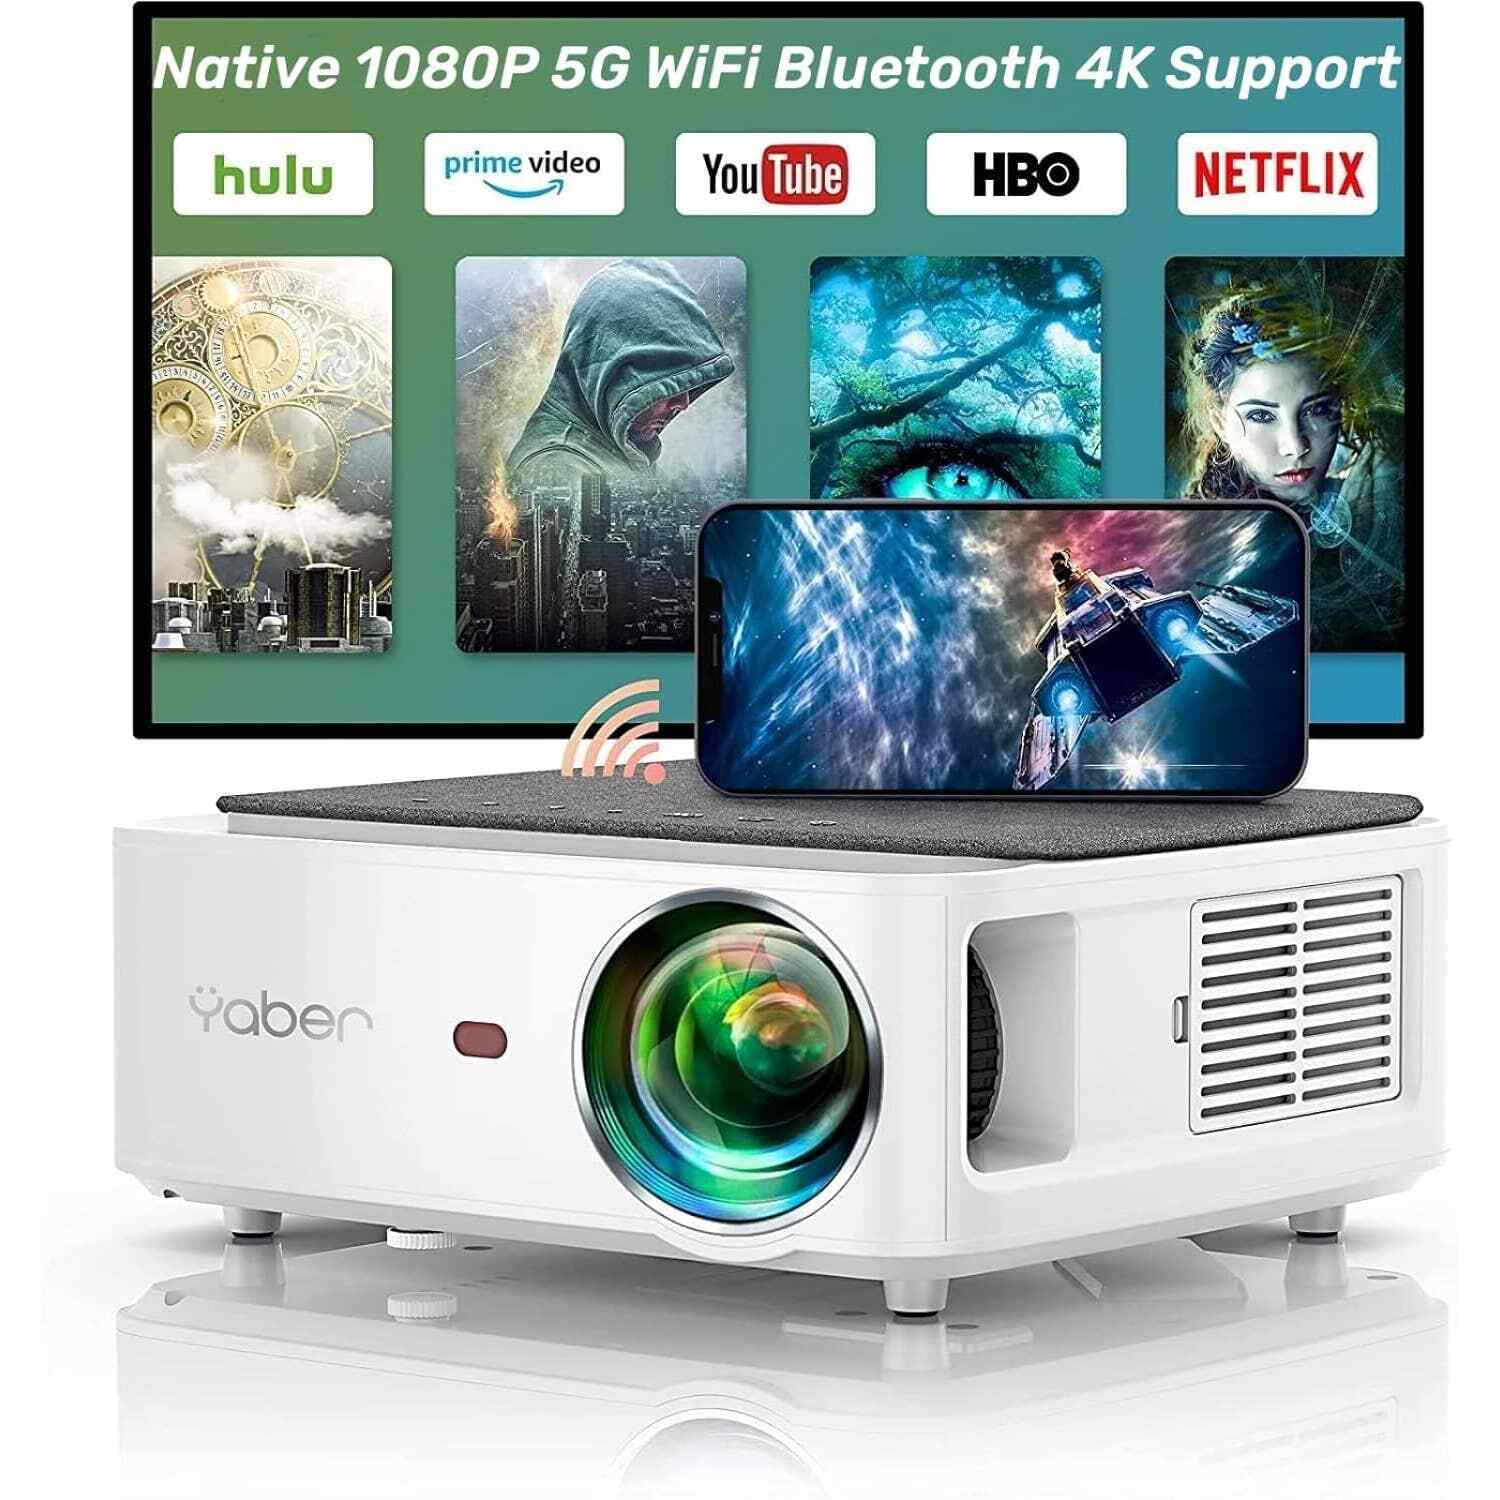 1080P WiFi Bluetooth Projector, 13000L, 4K Support, Portable Smart Home Theater